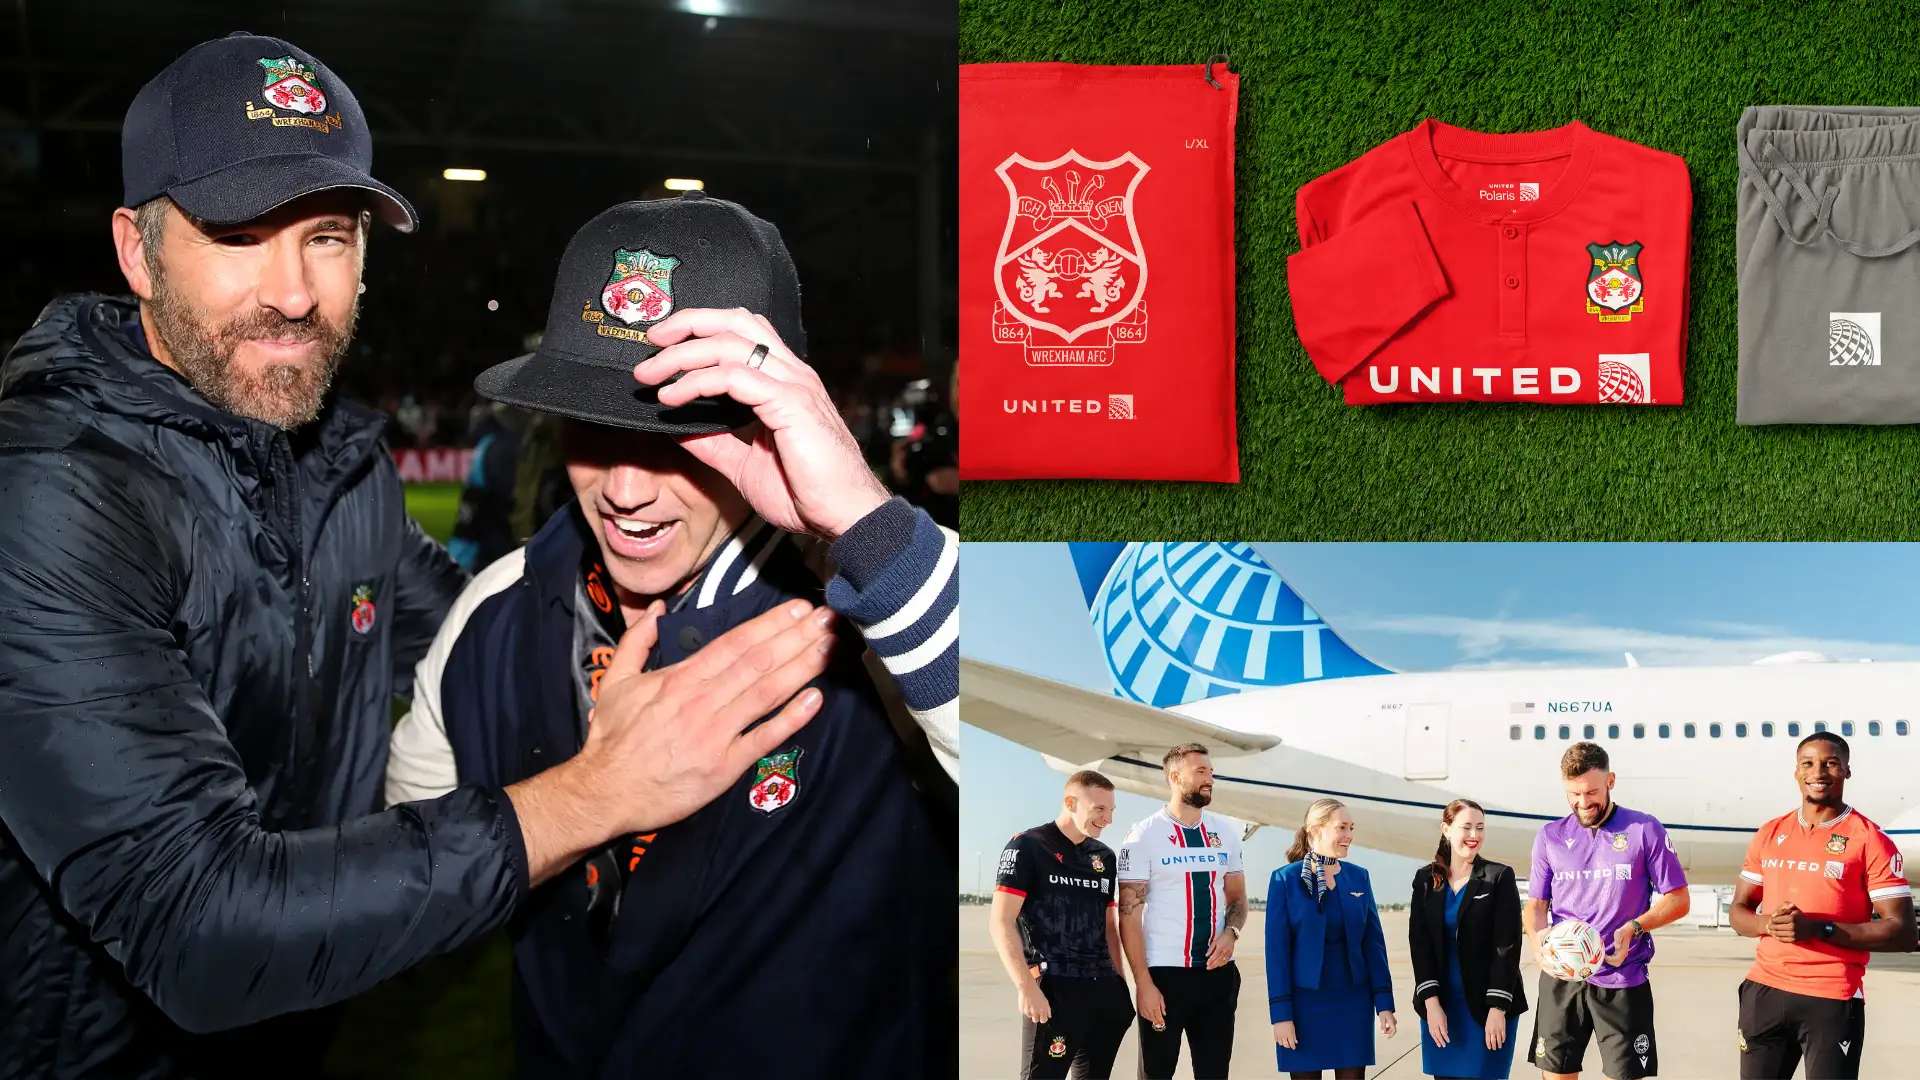 Ryan Reynolds & Rob McElhenney branch out into pyjamas! United Airlines reveal limited edition amenity kits & Pjs for Wrexham fans heading to the United States for pre-season tour